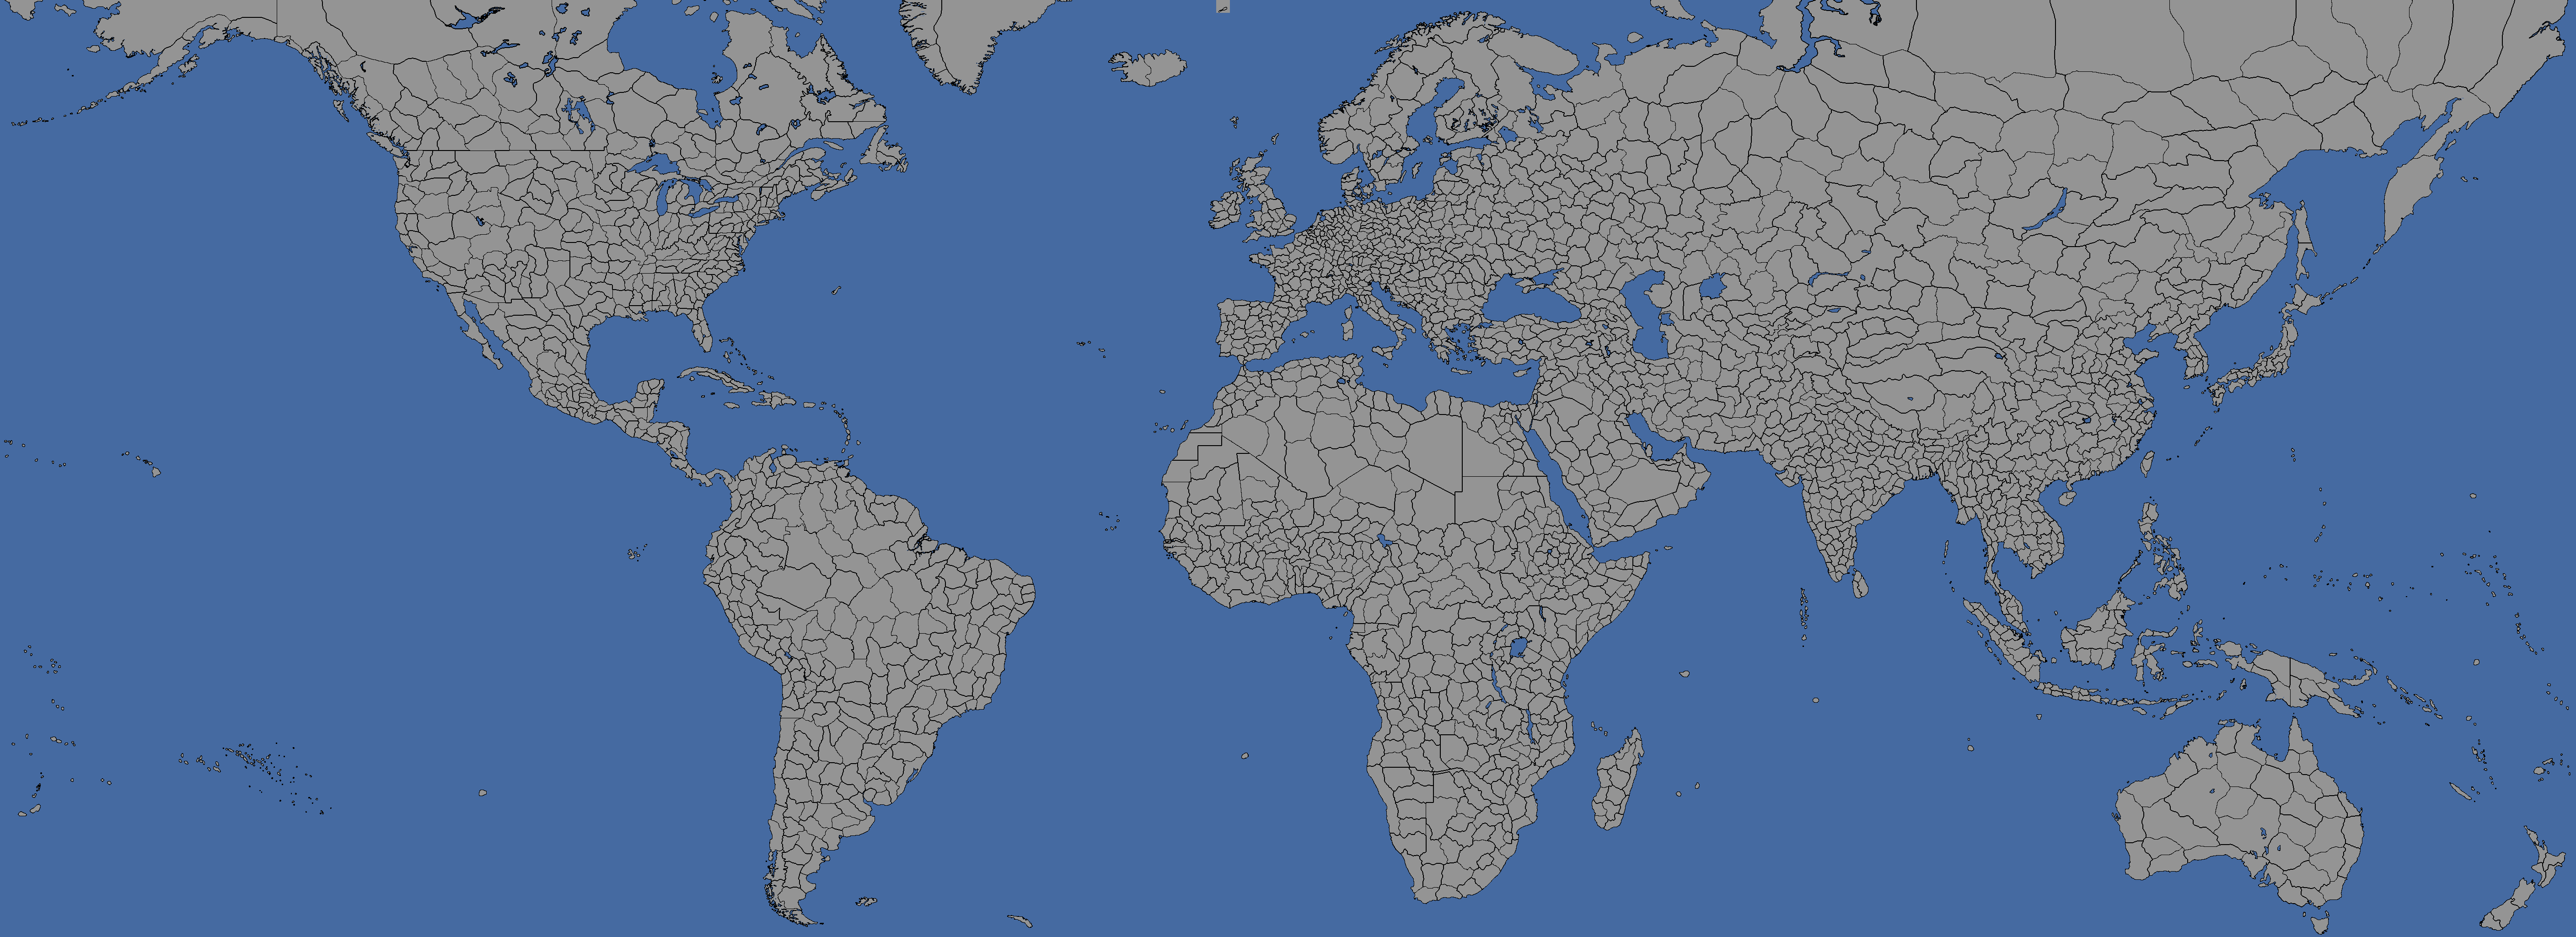 alania extended timeline